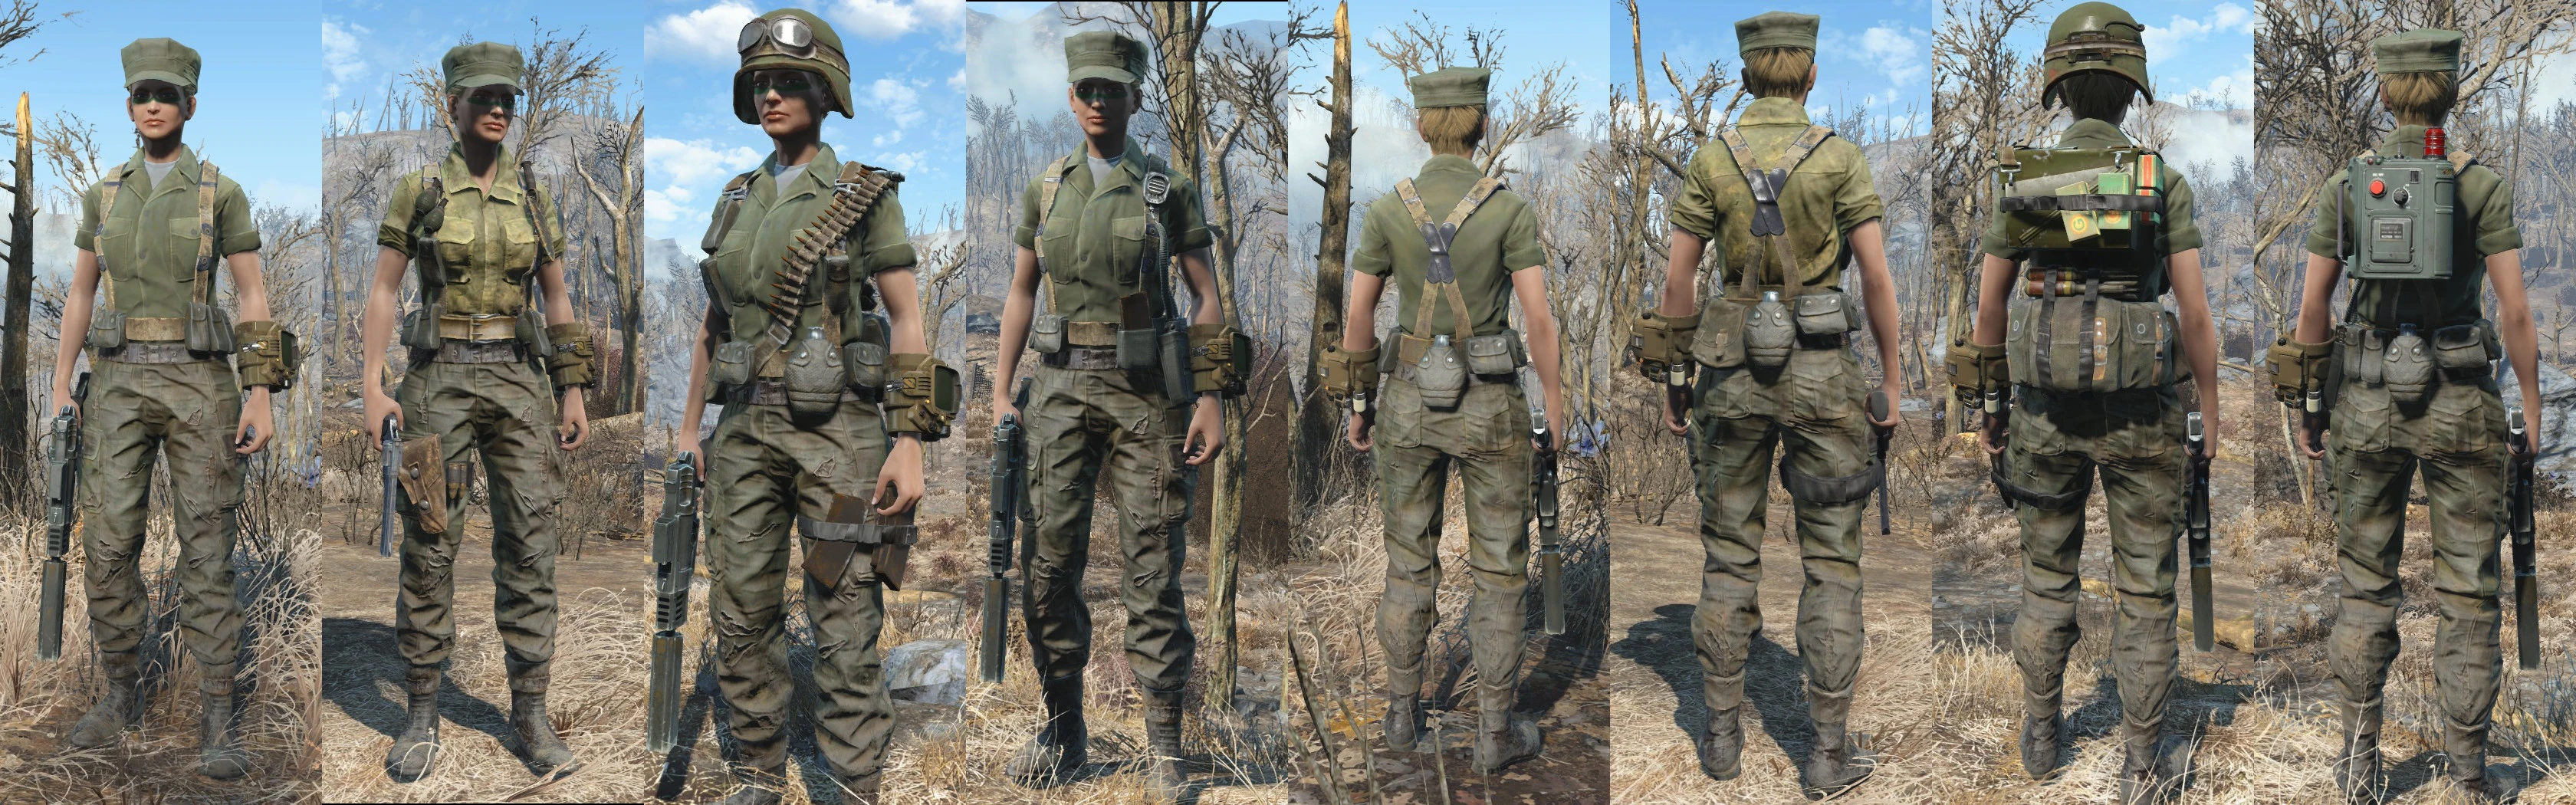 Fallout 4 gunners pack фото 11